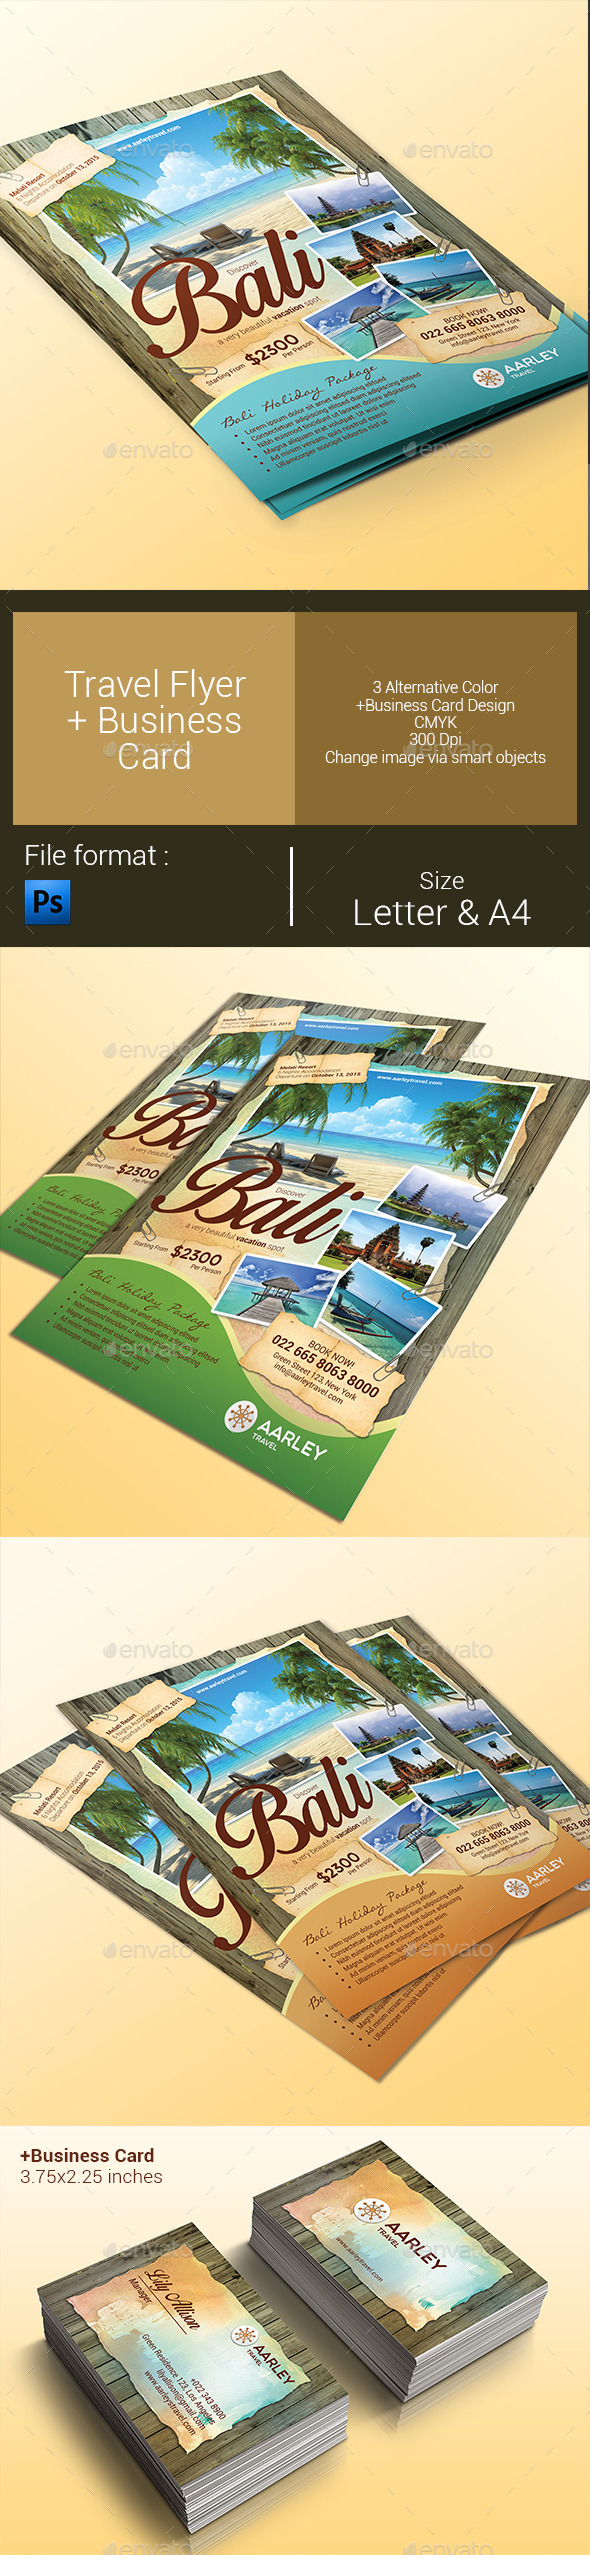  Travel Flyer + Business Card 